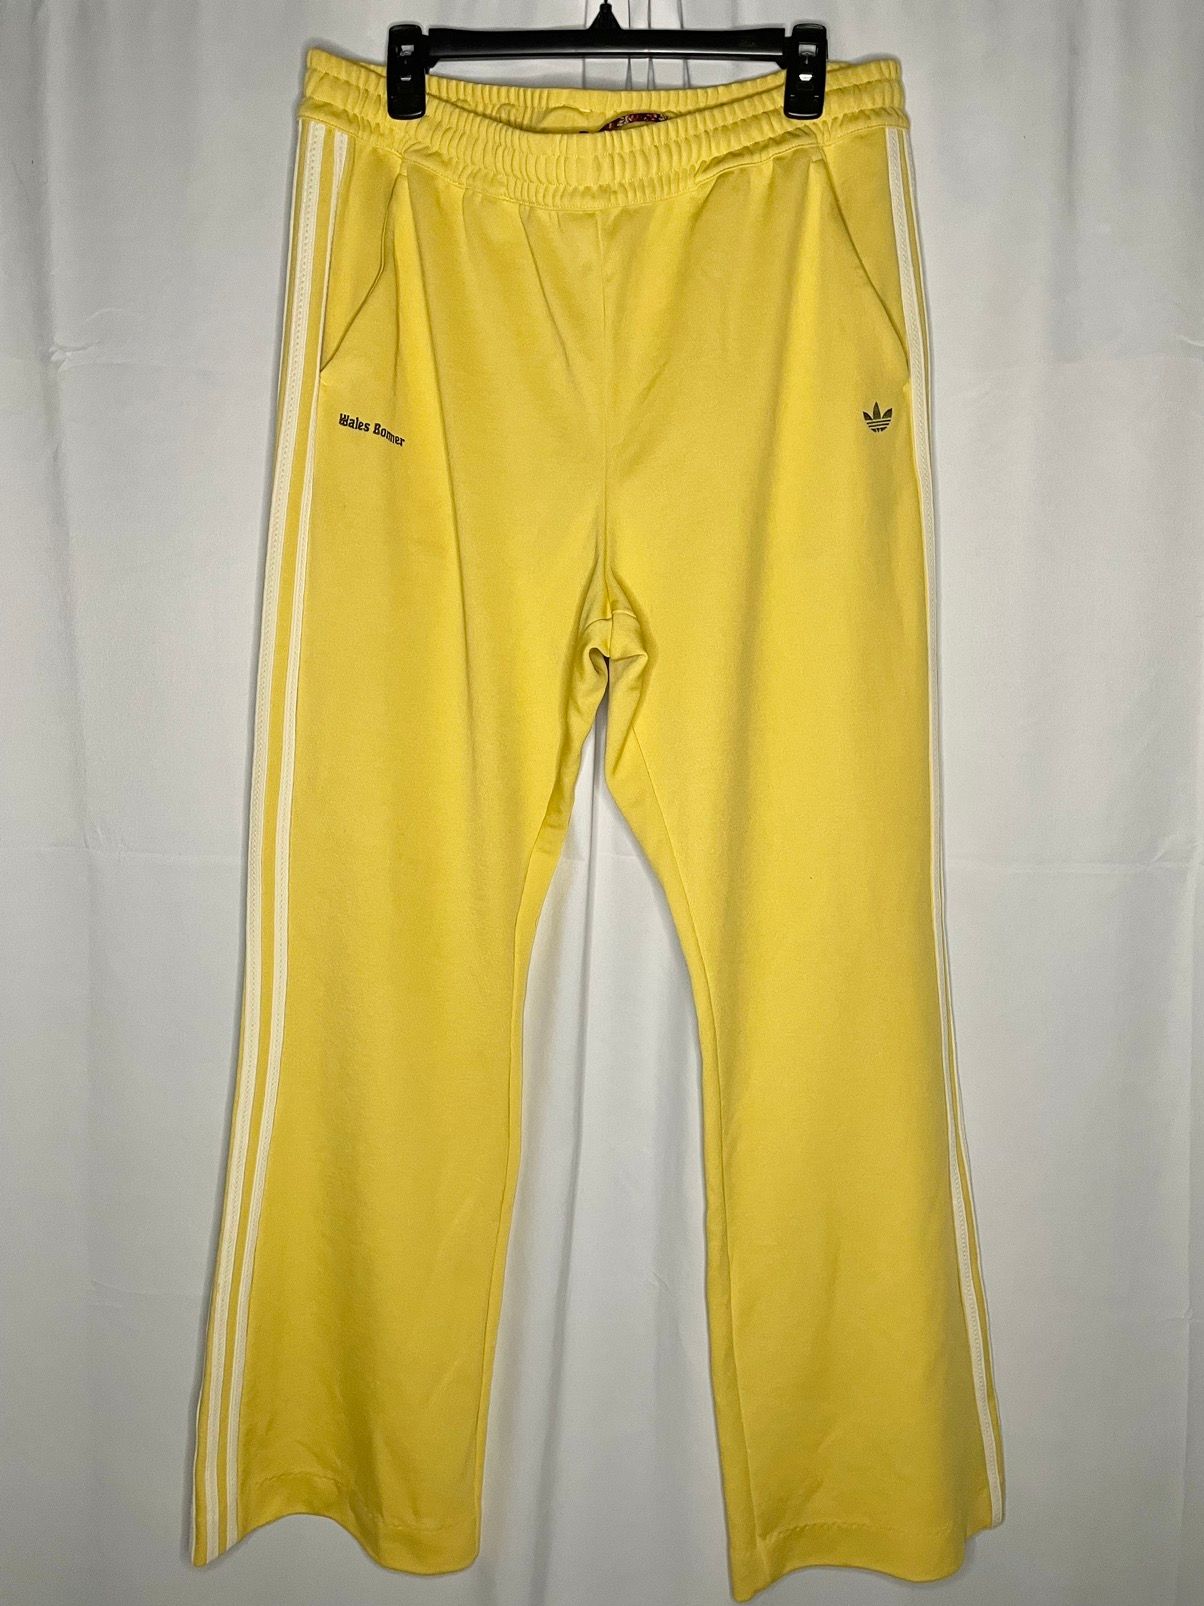 Pre-owned Adidas X Wales Bonner Adidas Flared Track Pants In Yellow